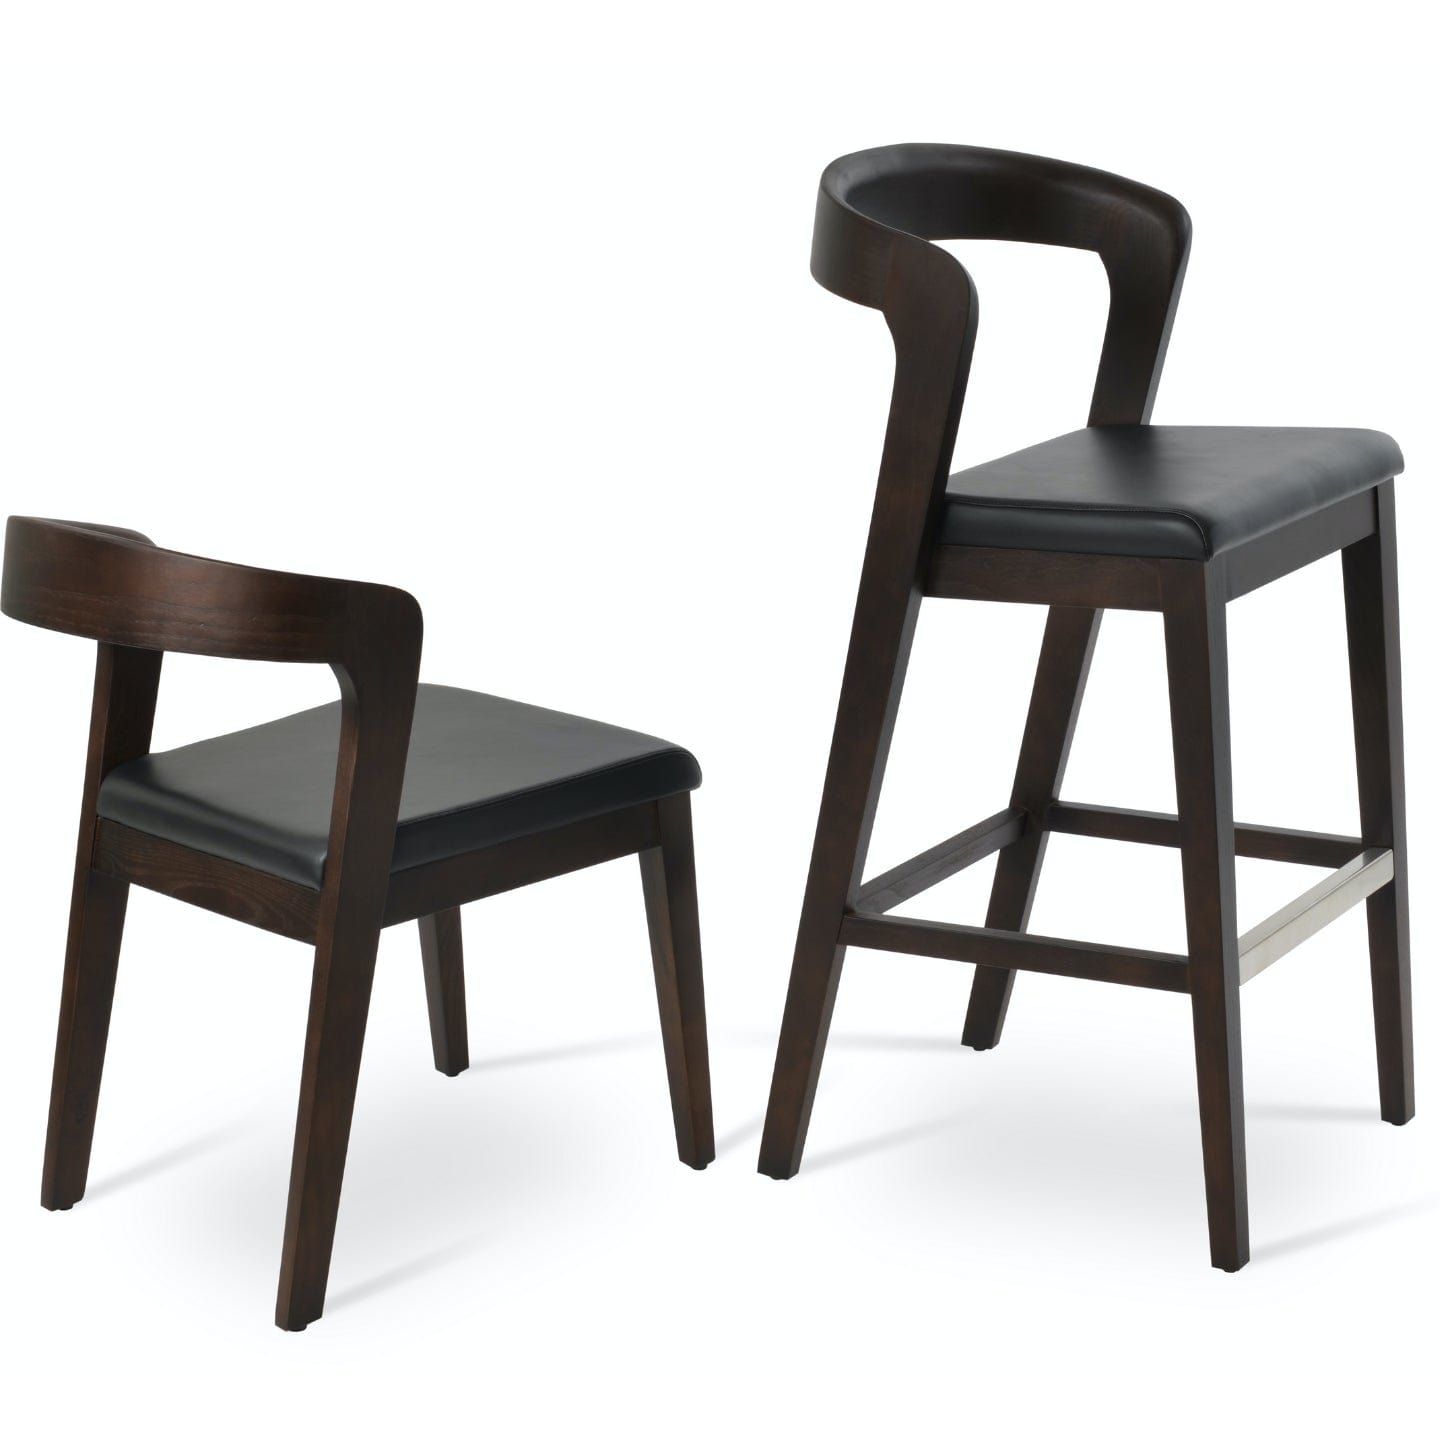 Soho Concept barclay-chair-walnut-wood-base-faux-leather-seat-dining-chair-in-black